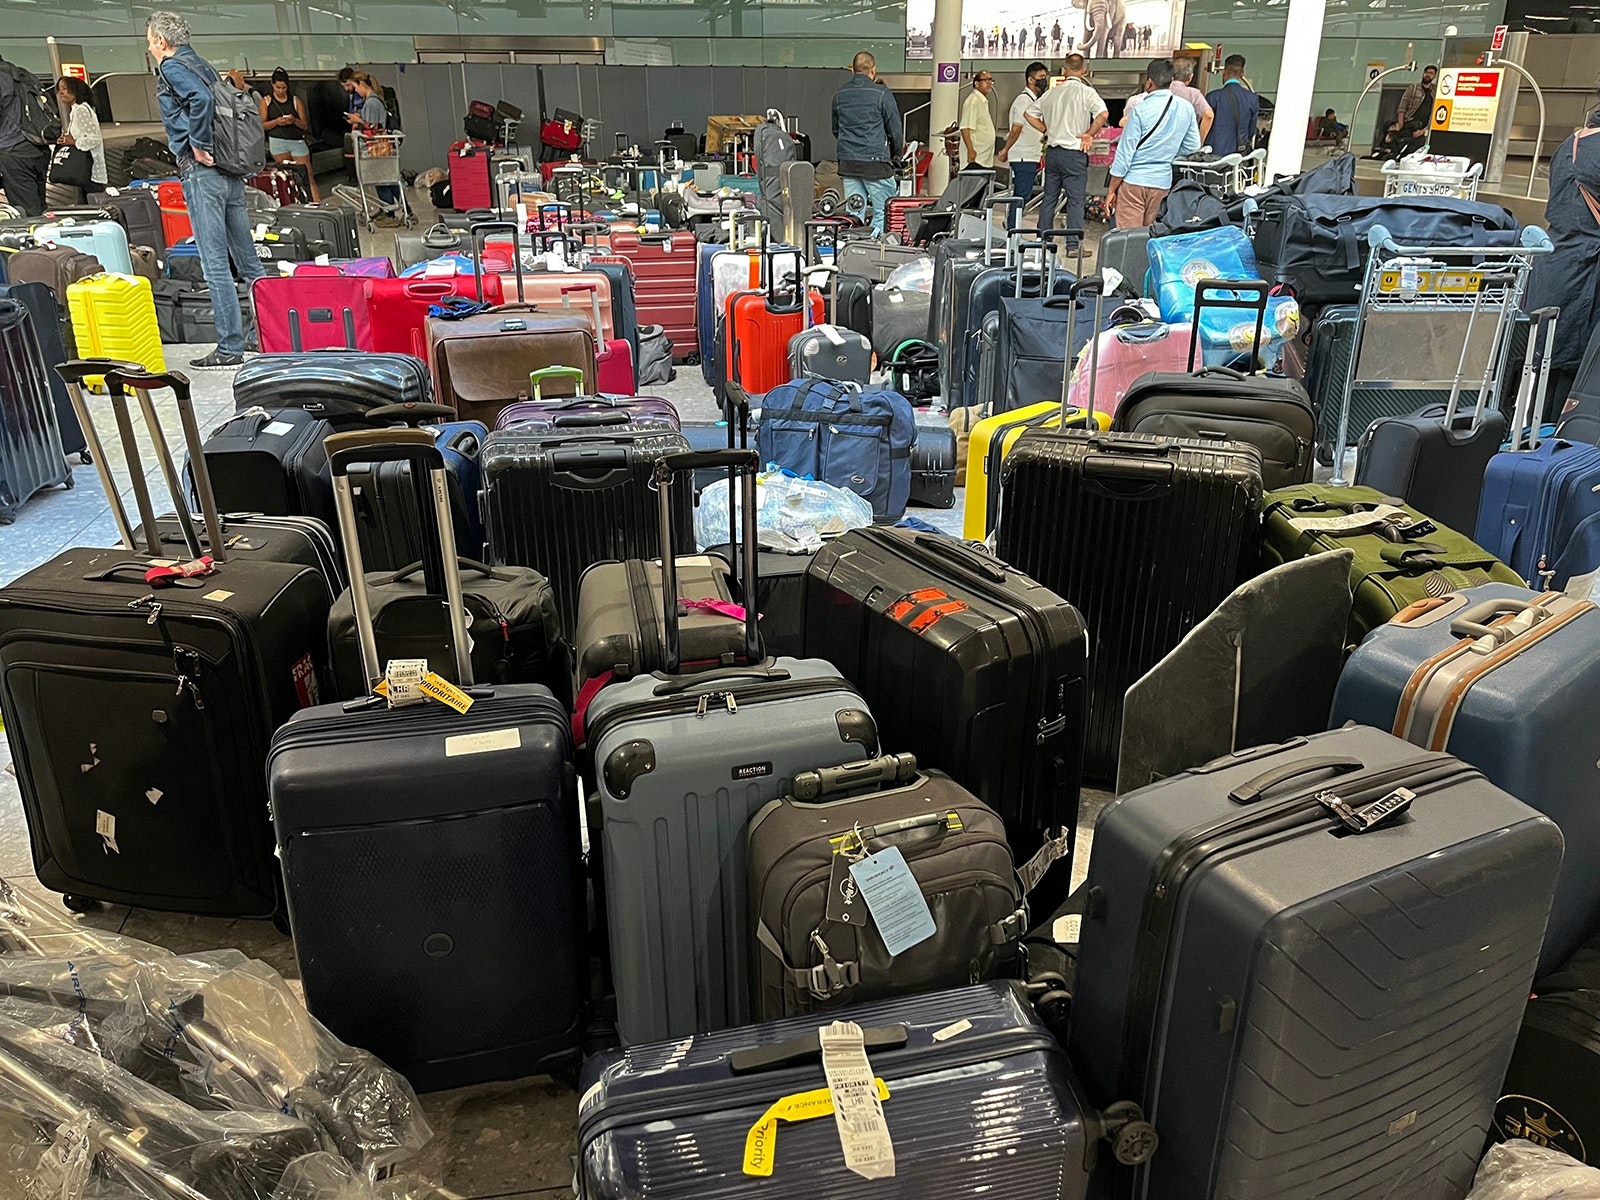 Yuen: How to travel with carry-on only — and some tips if you can't